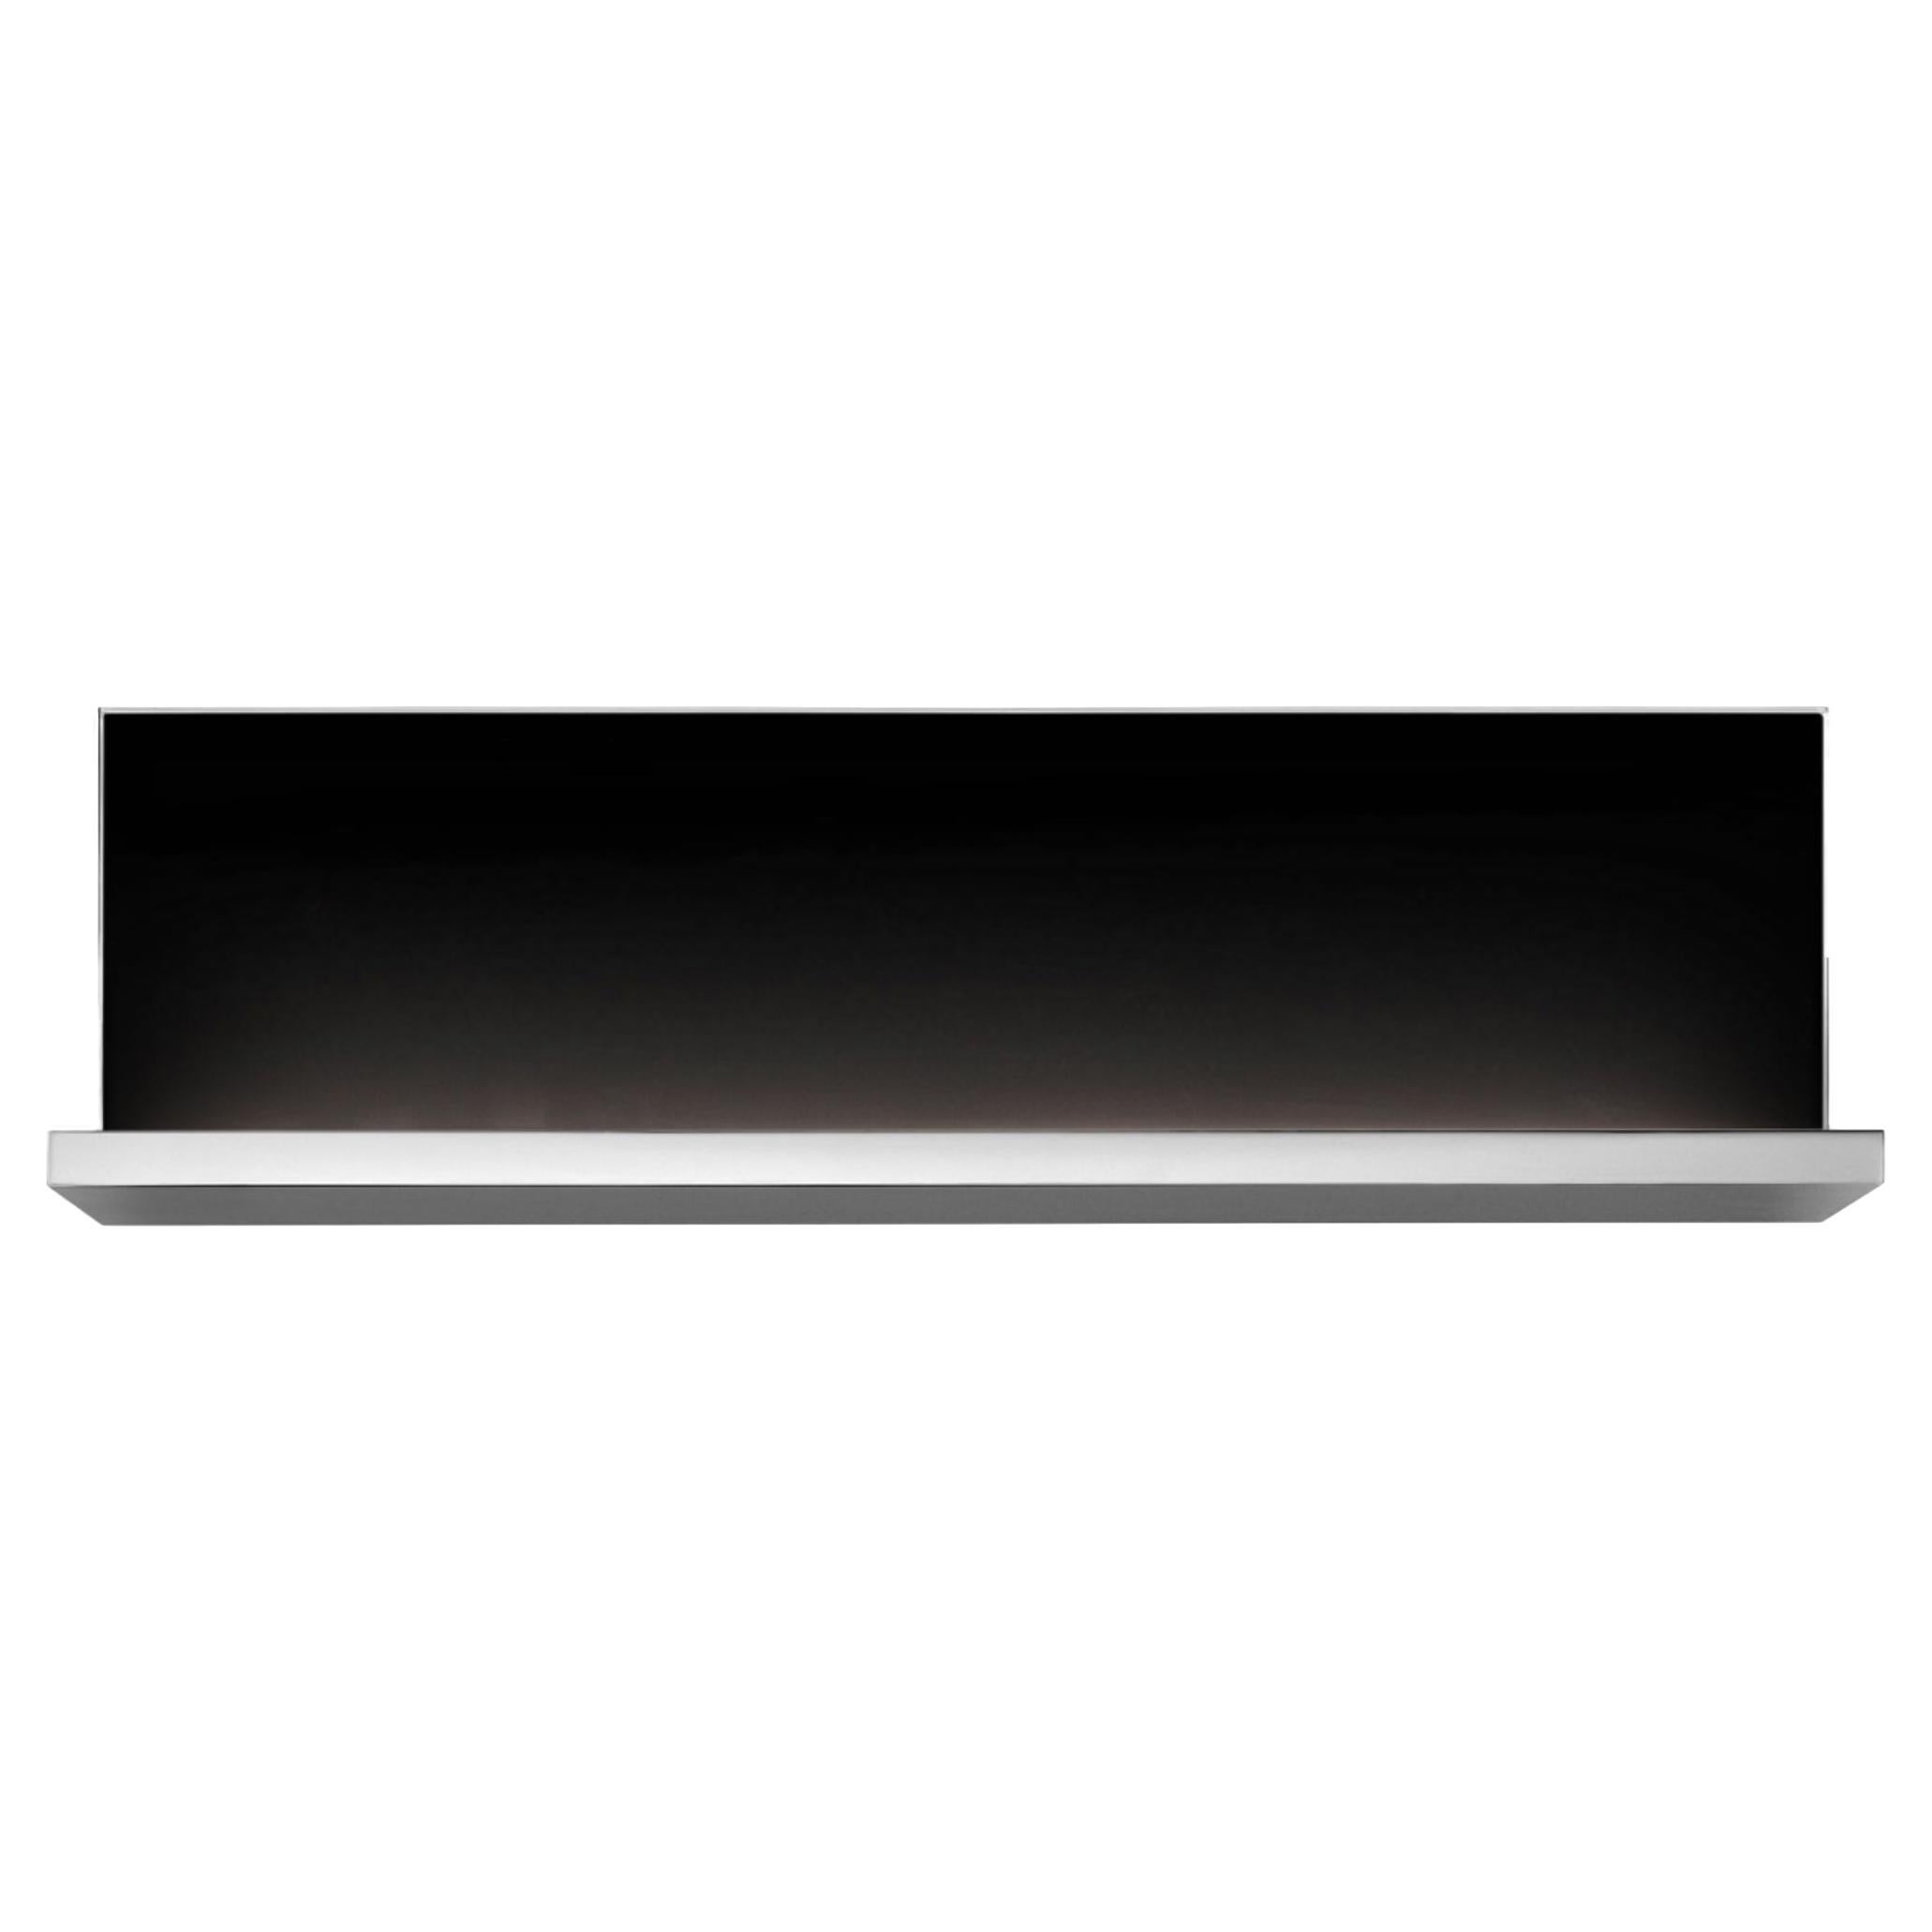 Philippe Starck for Flos Hide L Wall Light Sconce, Large, Black, Shelf, Italy. For Sale